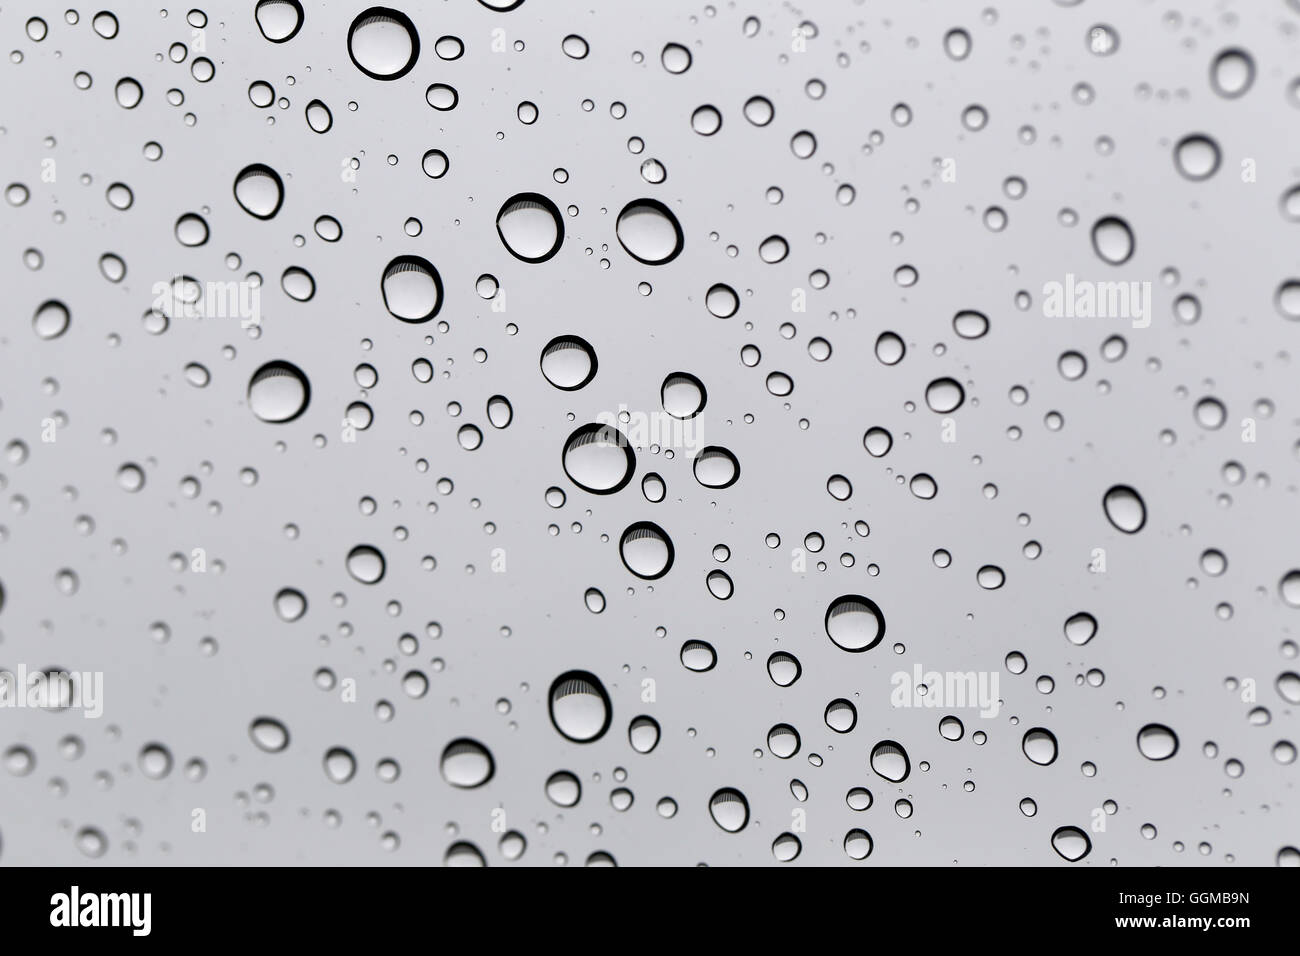 Drop of water for the background on glass car window to abstract design and nature backdrop. Stock Photo